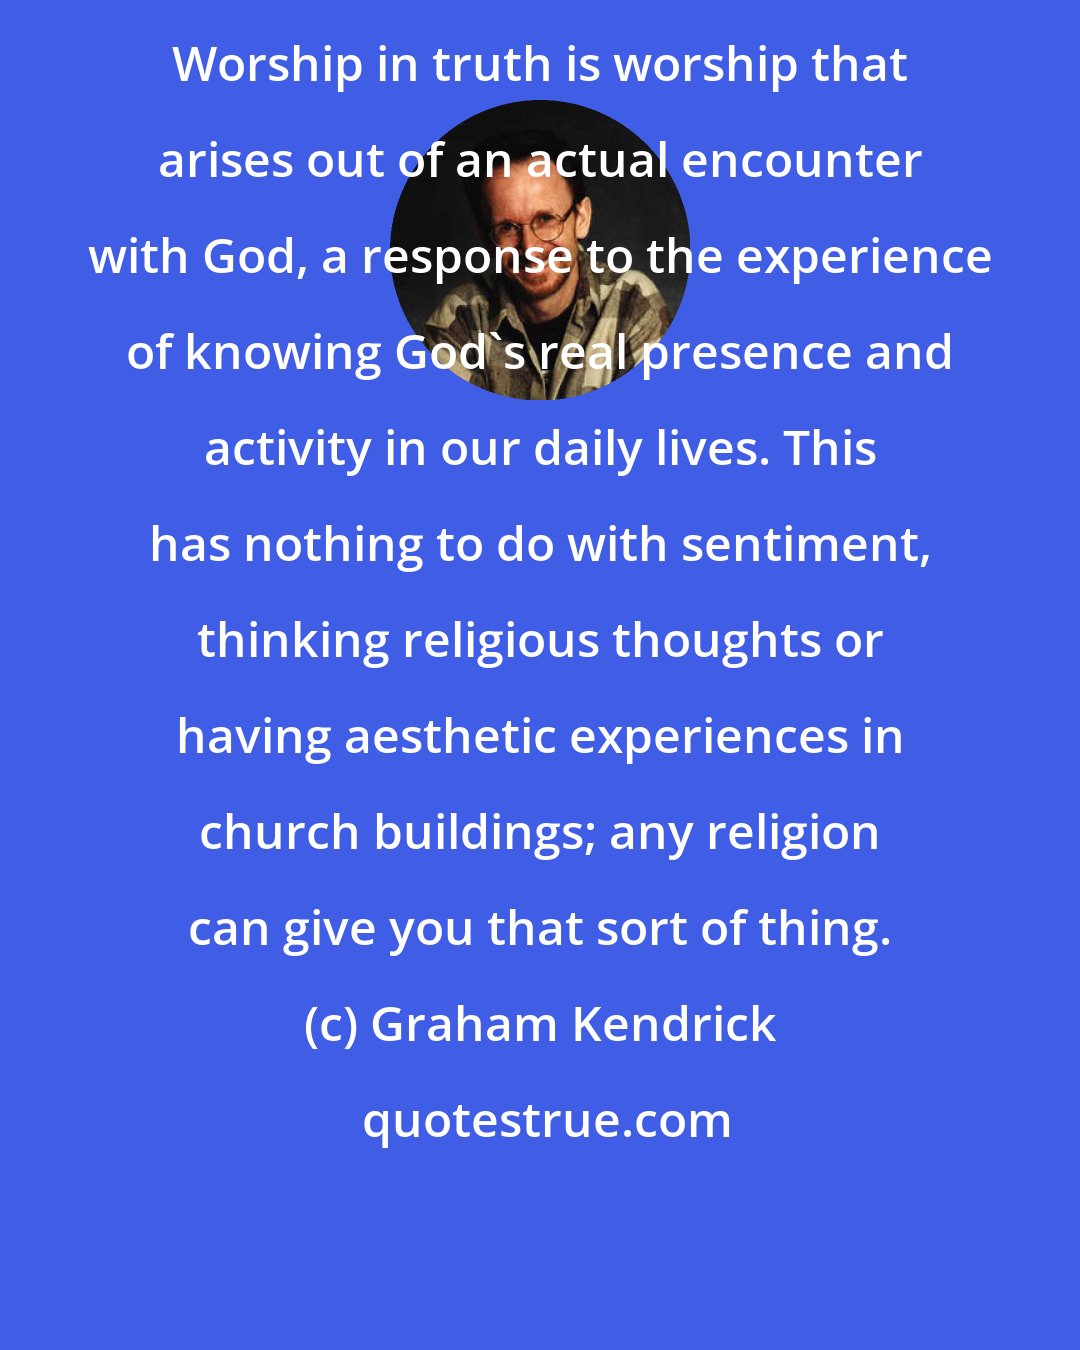 Graham Kendrick: Worship in truth is worship that arises out of an actual encounter with God, a response to the experience of knowing God's real presence and activity in our daily lives. This has nothing to do with sentiment, thinking religious thoughts or having aesthetic experiences in church buildings; any religion can give you that sort of thing.